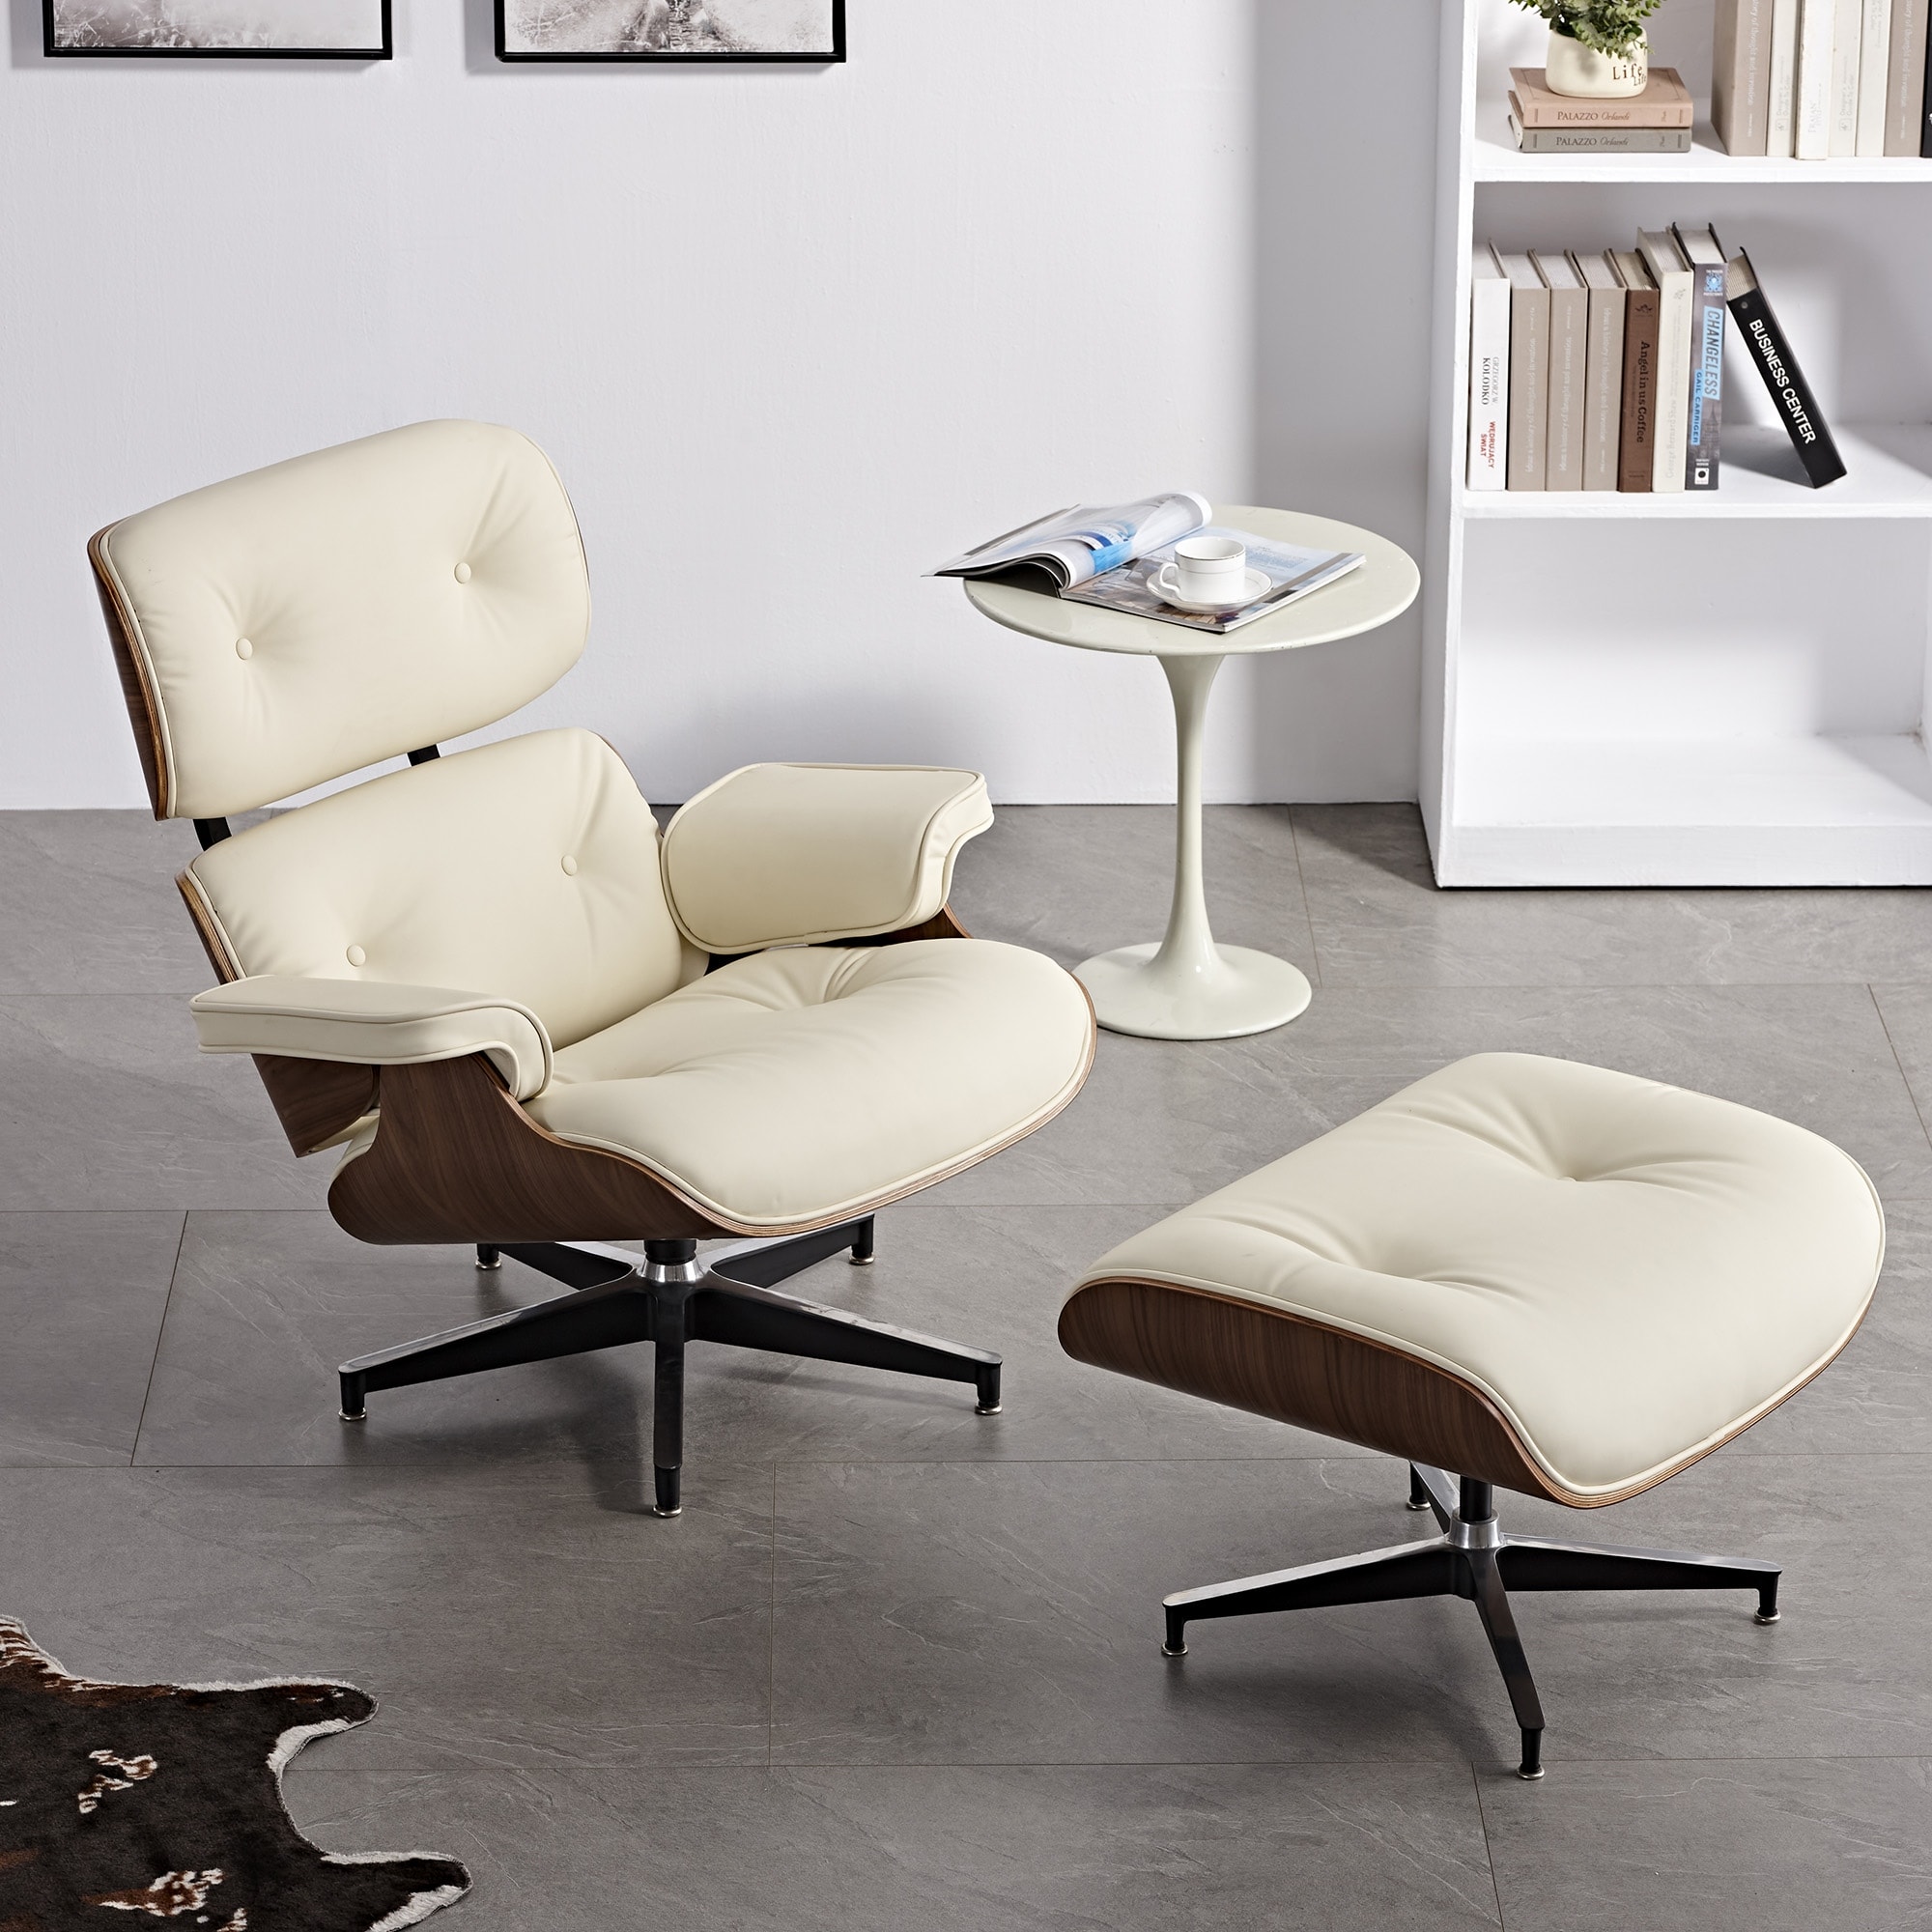 https://ak1.ostkcdn.com/images/products/is/images/direct/eef5cfd9d8308a95c2248f49416c32ab1bd3f8ae/Mid-century-Modern-Leather-Arm-Chair-and-Ottoman-Set.jpg